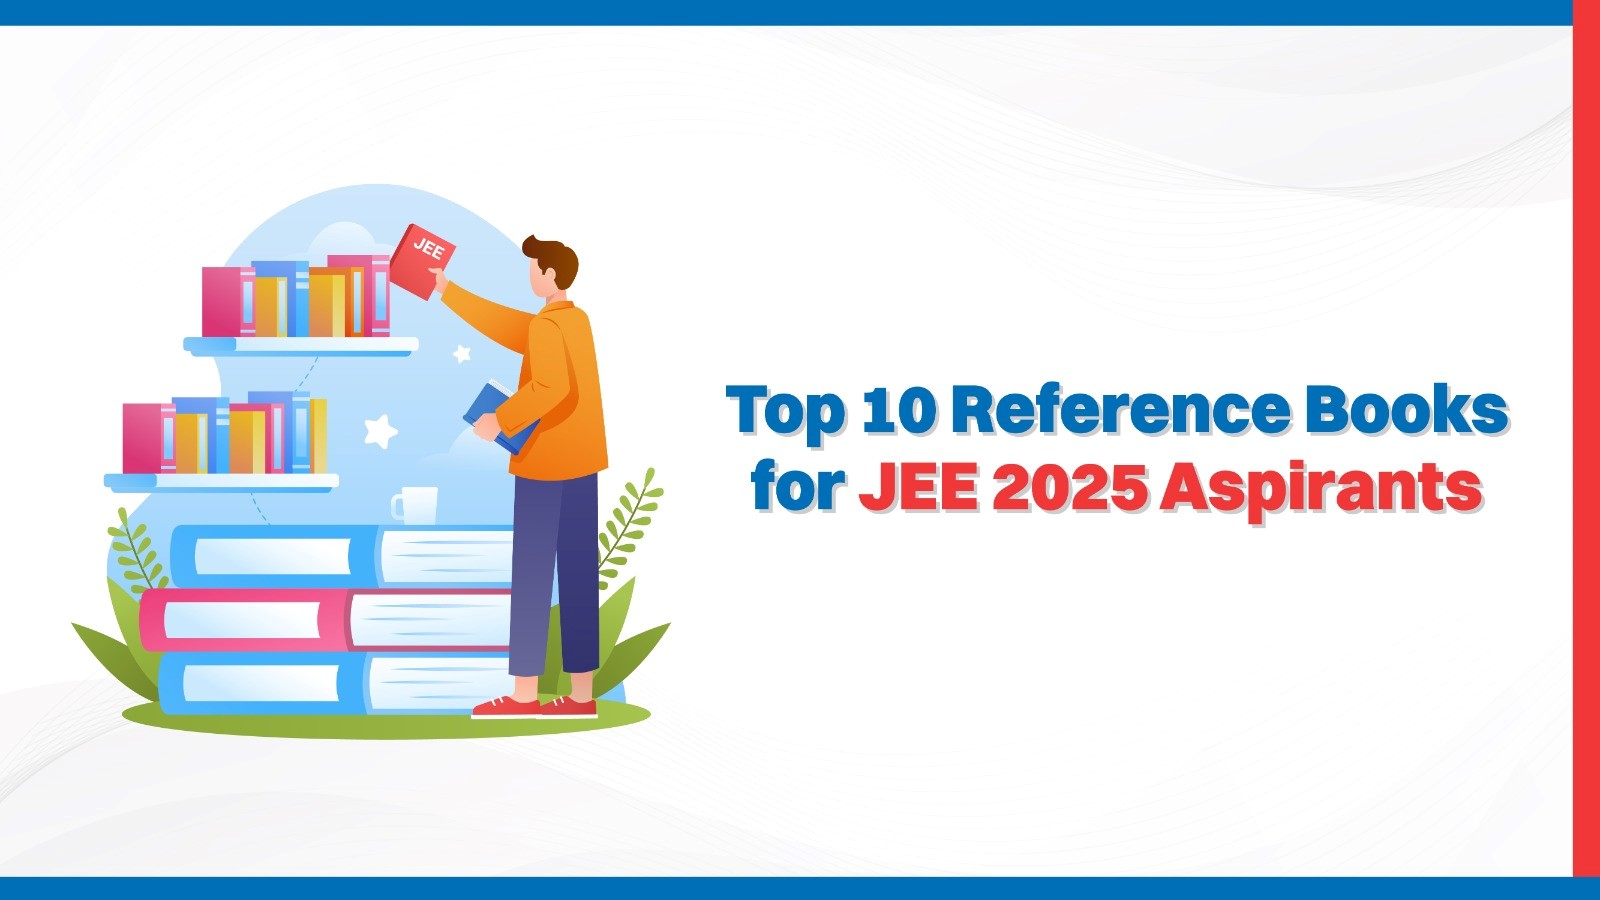 Top 10 Reference Books for JEE 2025 Aspirants